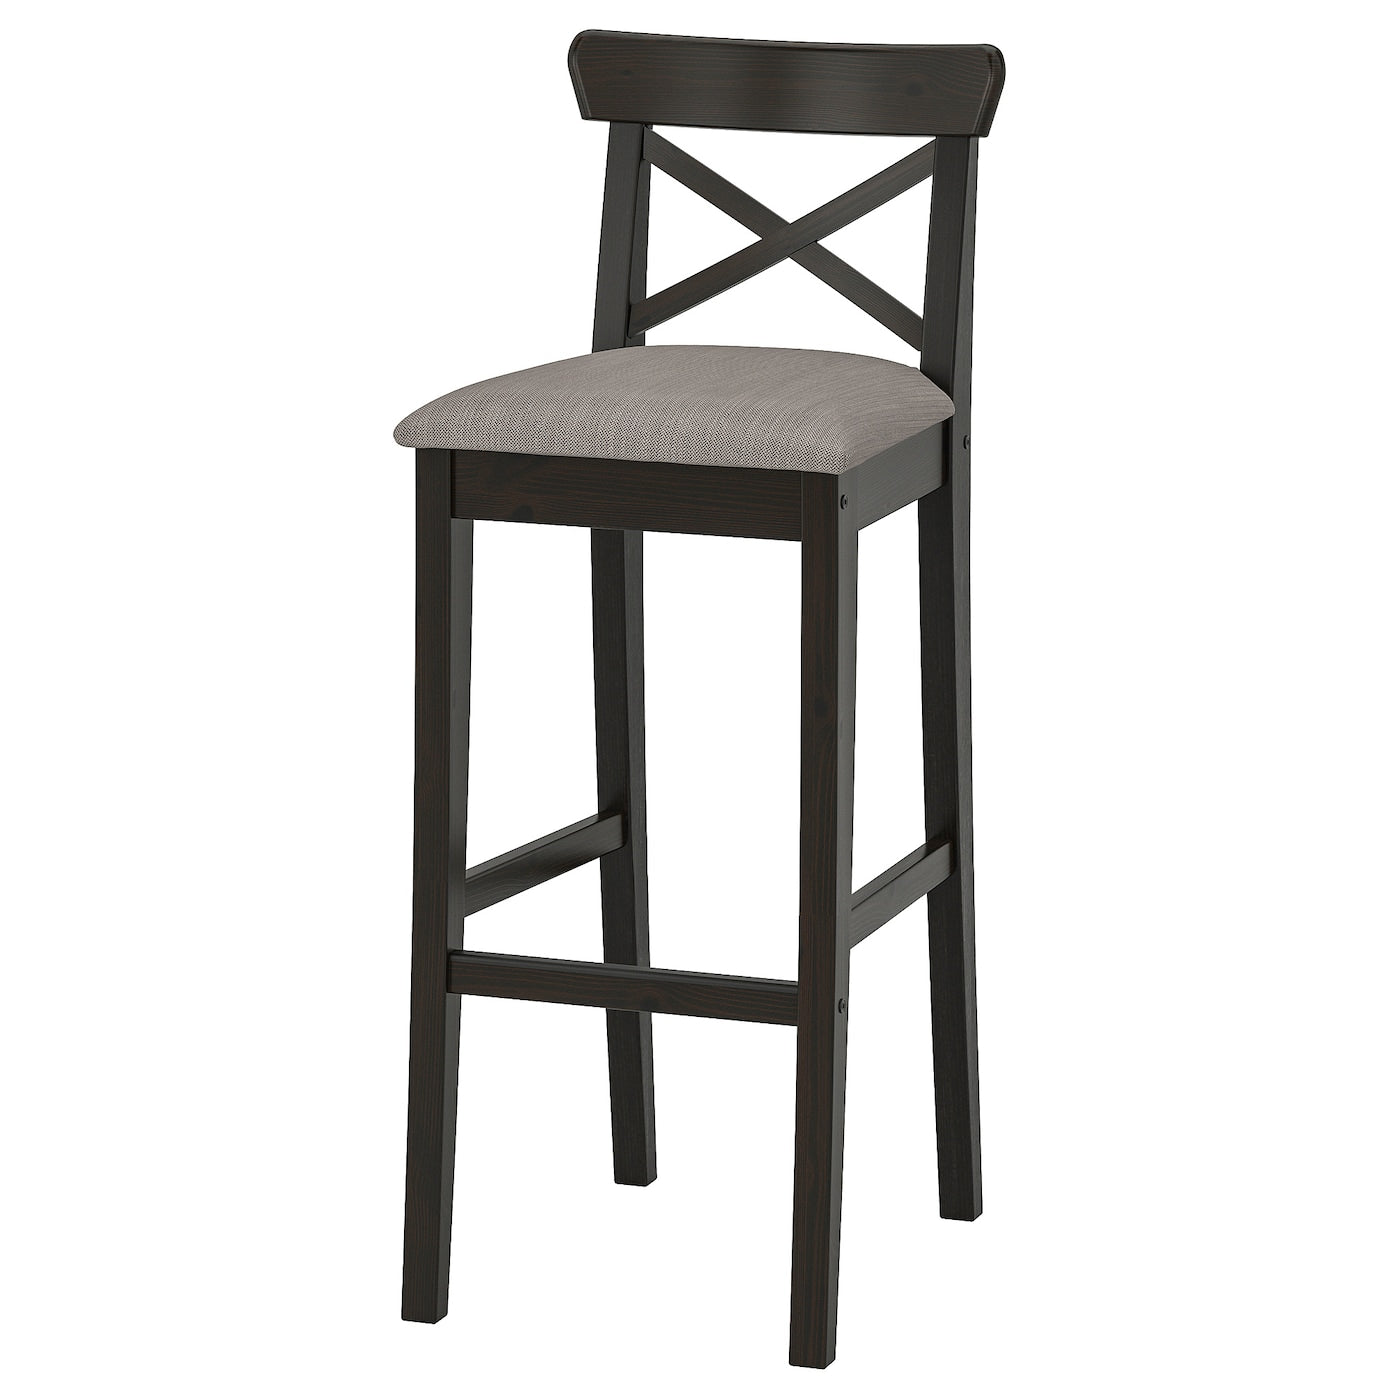 Bar tables & chairs